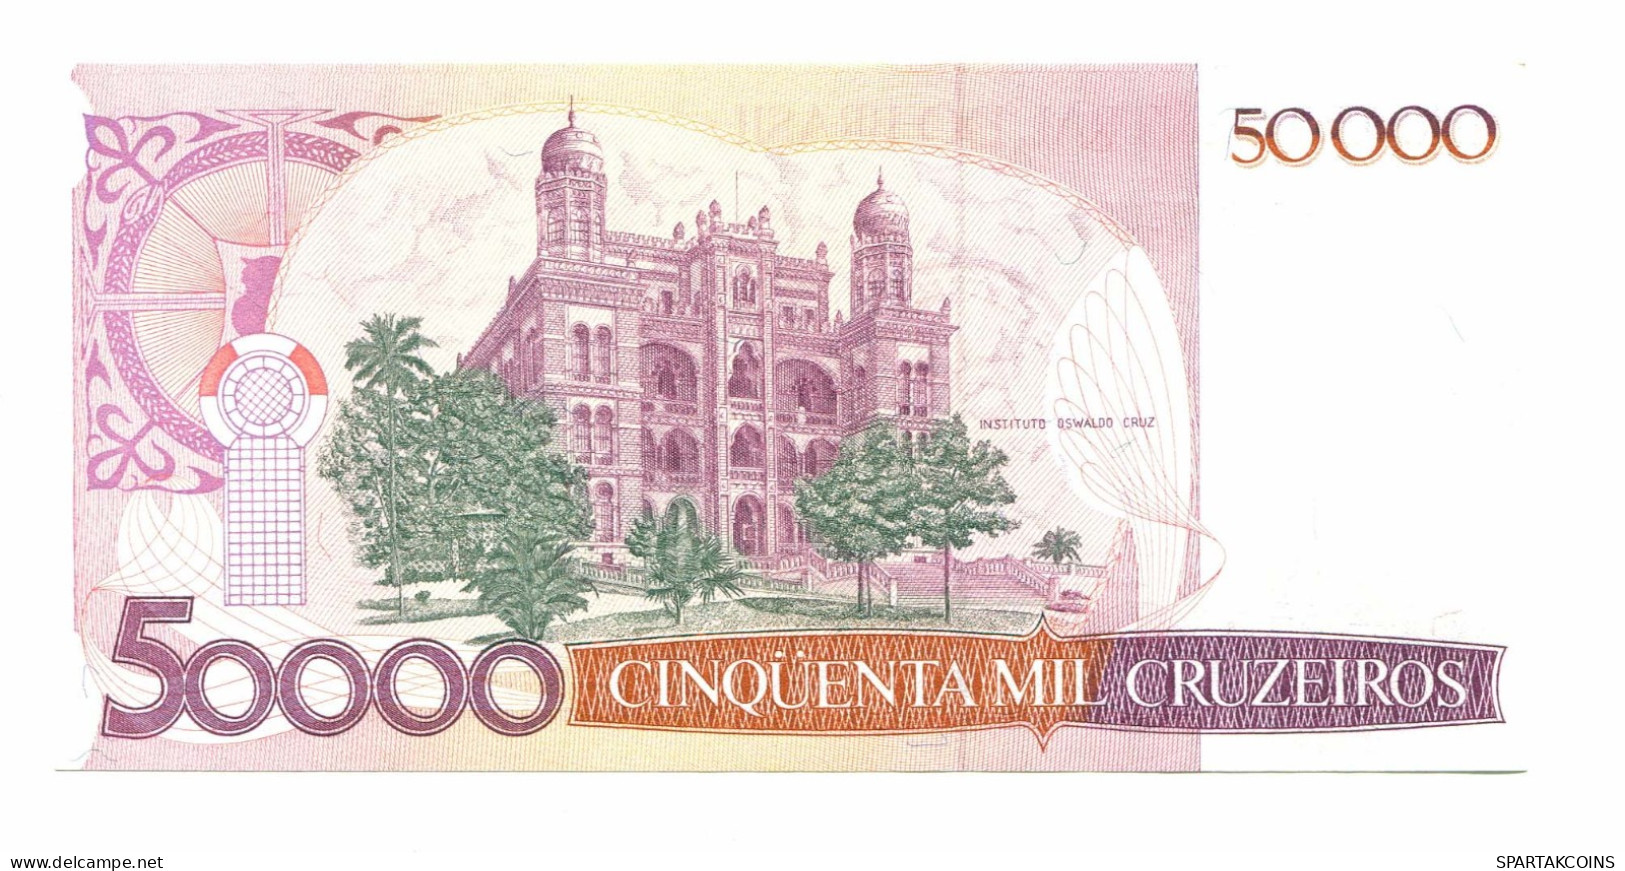 BRAZIL REPLACEMENT NOTE Star*A 50 CRUZADOS ON 50000 CRUZEIROS 1986 UNC P10999.6 - [11] Local Banknote Issues